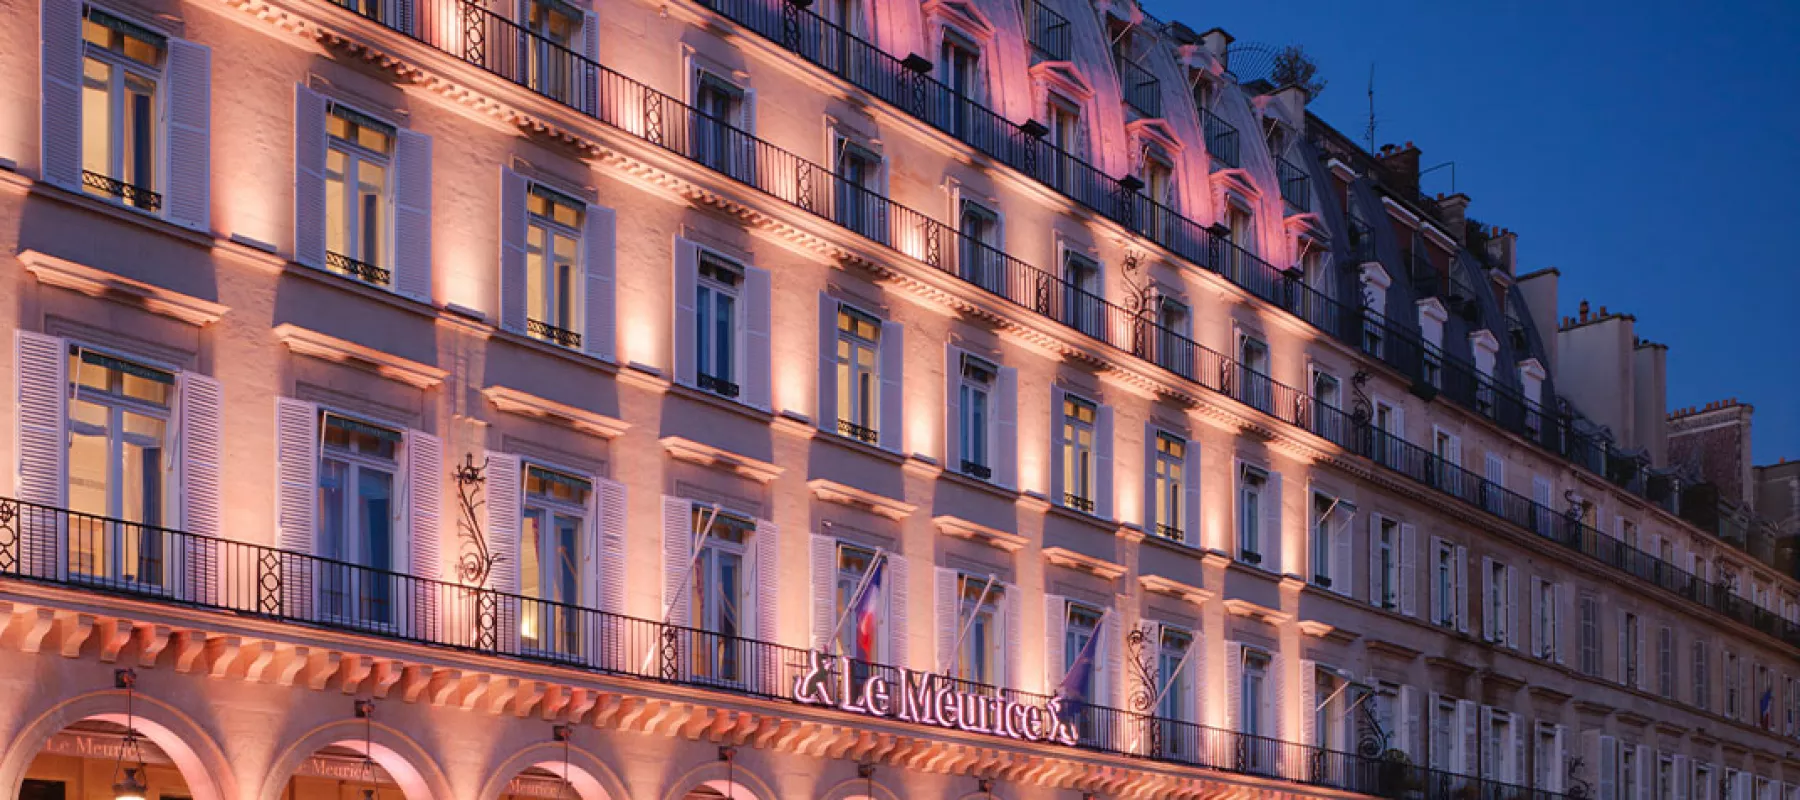 Le Meurice Chooses La Casa Shared Housing to Accommodate Its Employees and Facilitate Their Recruitment